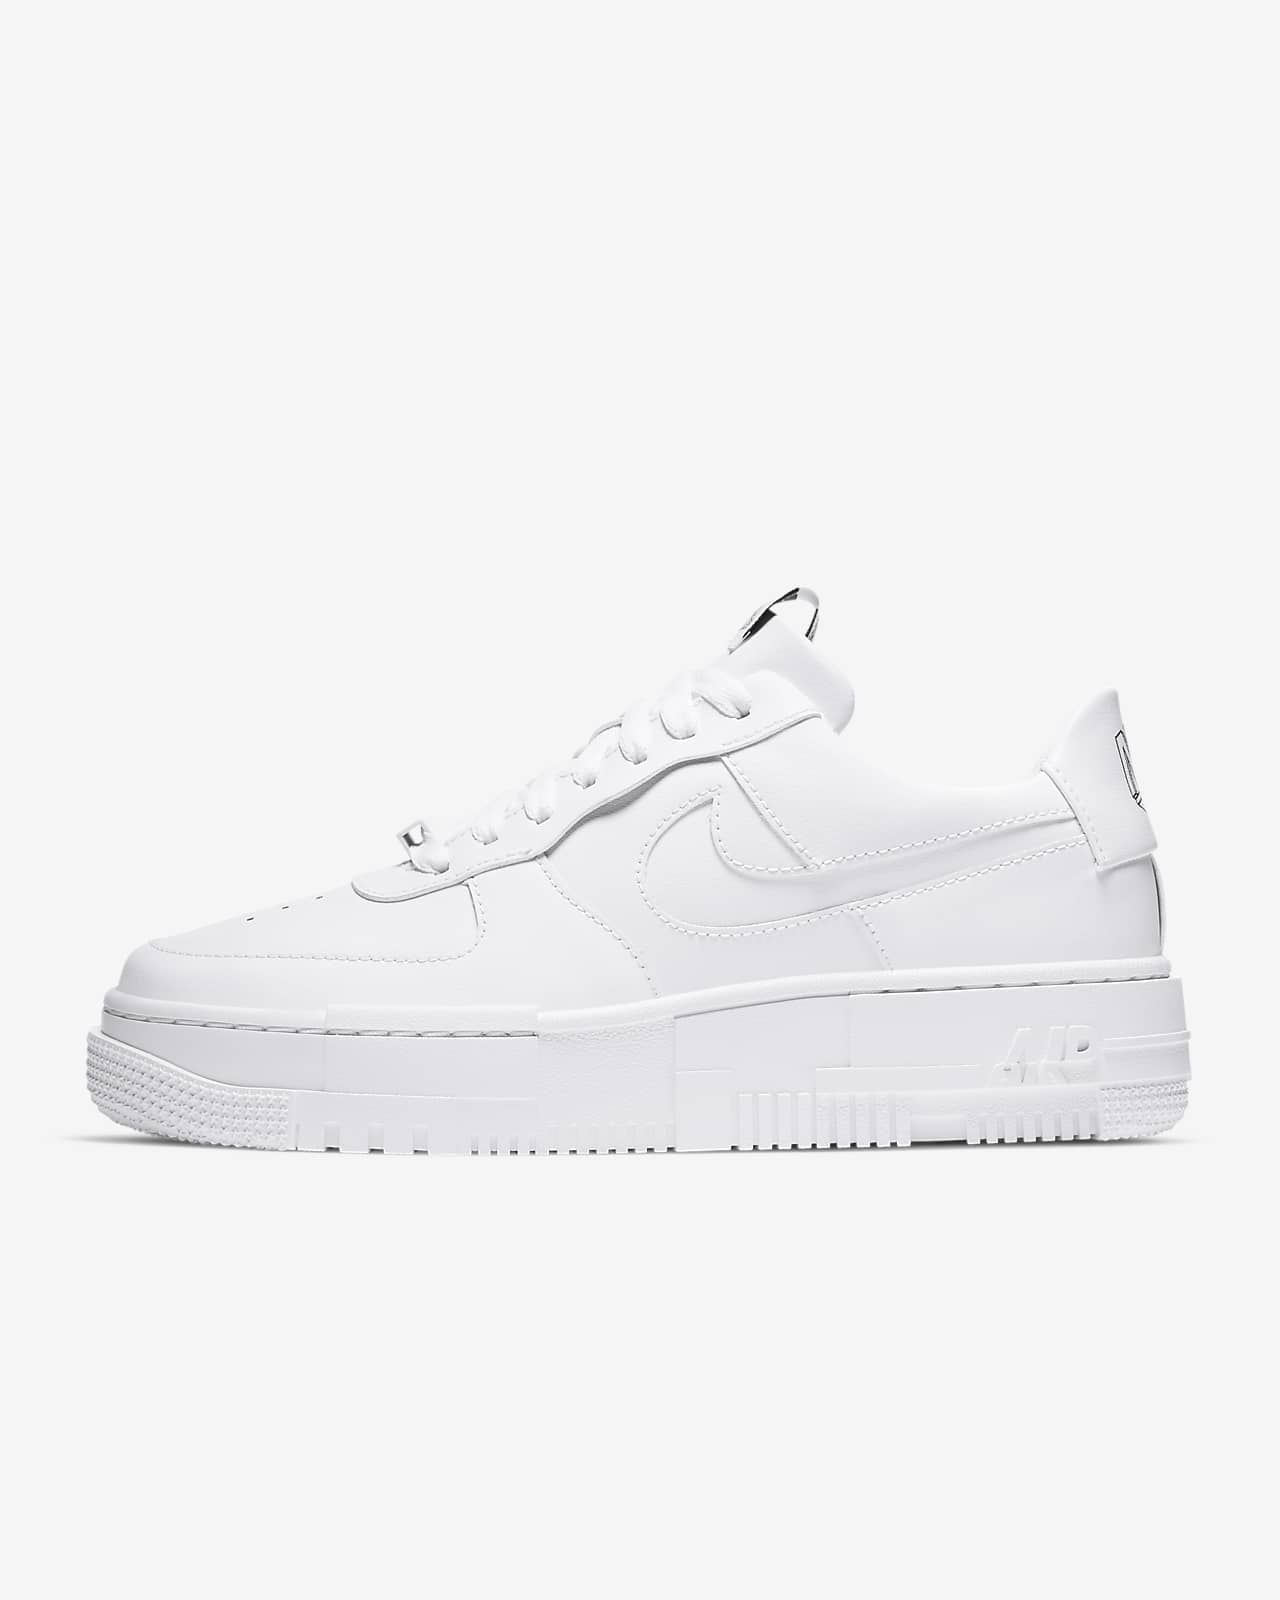 Chaussure Nike Air Force 1 Pixel pour 